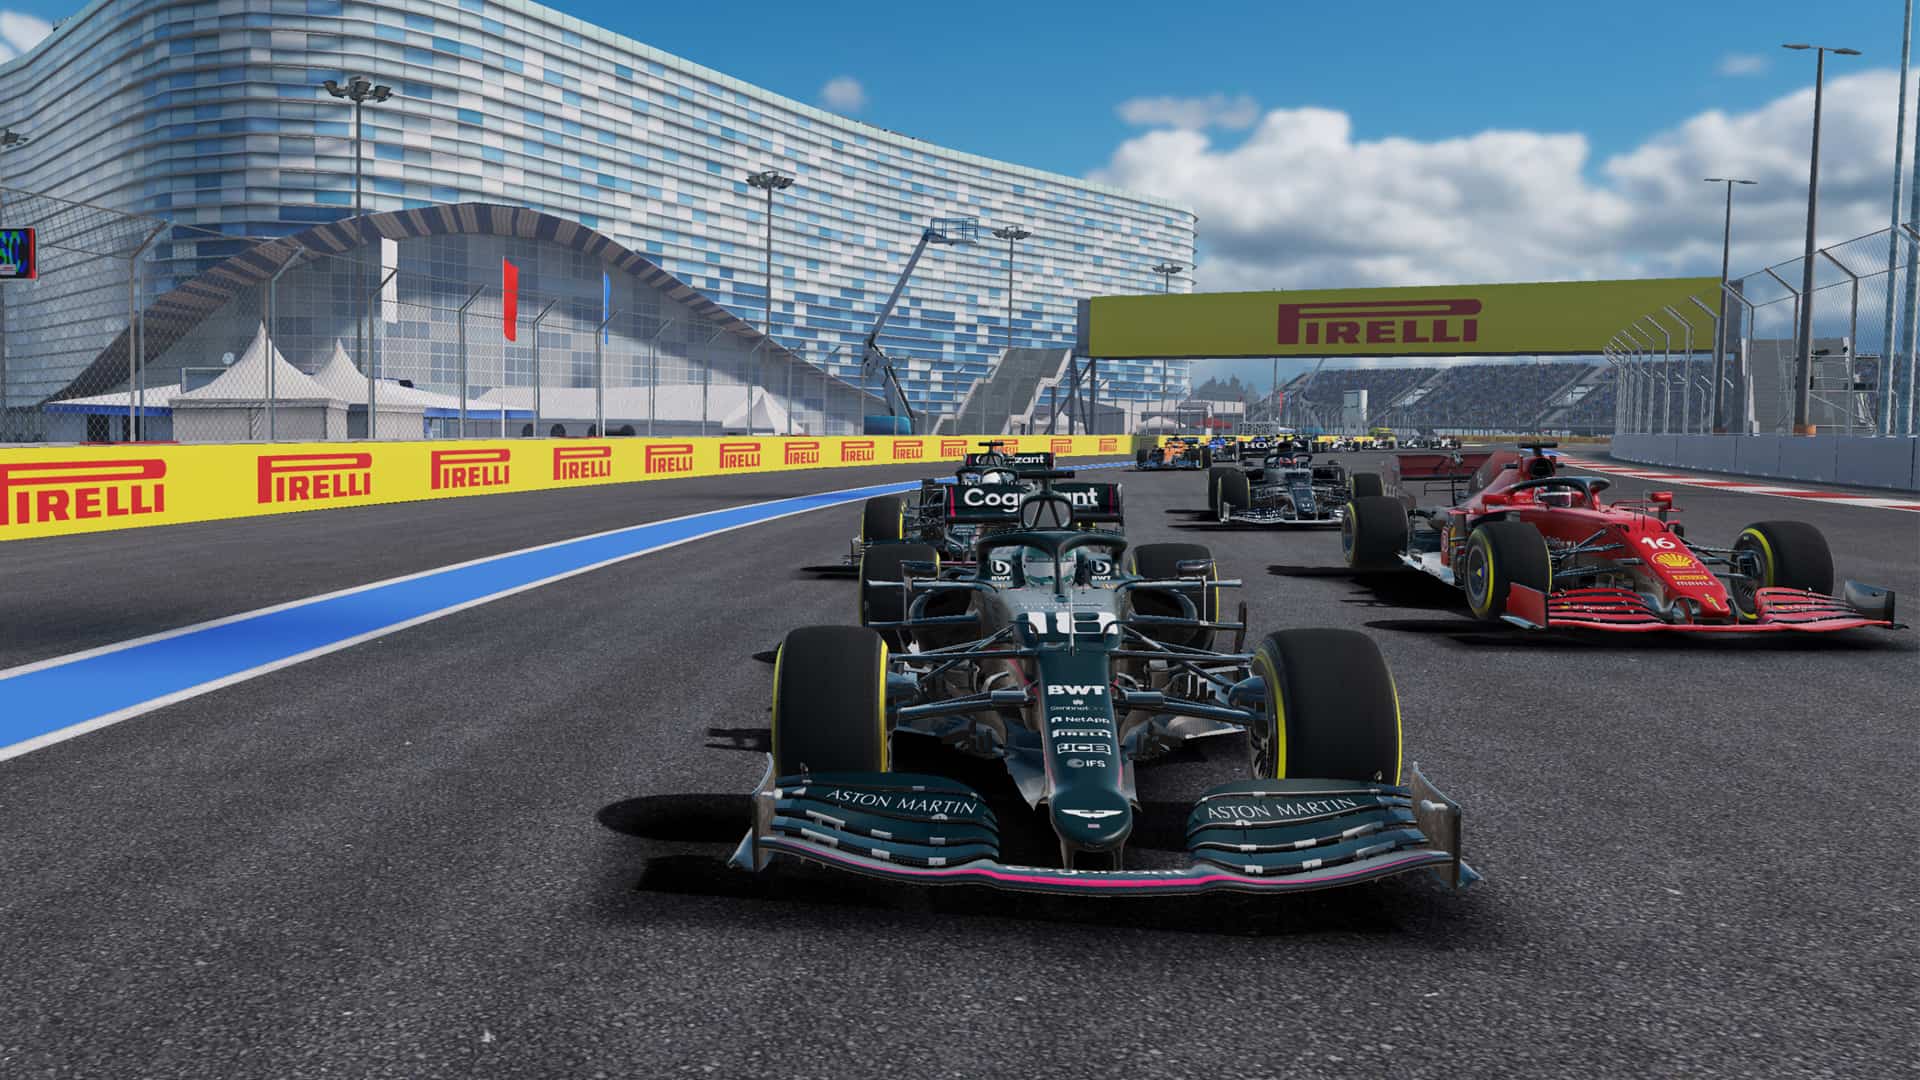 F1 Mobile Racing’s 2021 season update is out now on iOS and Android